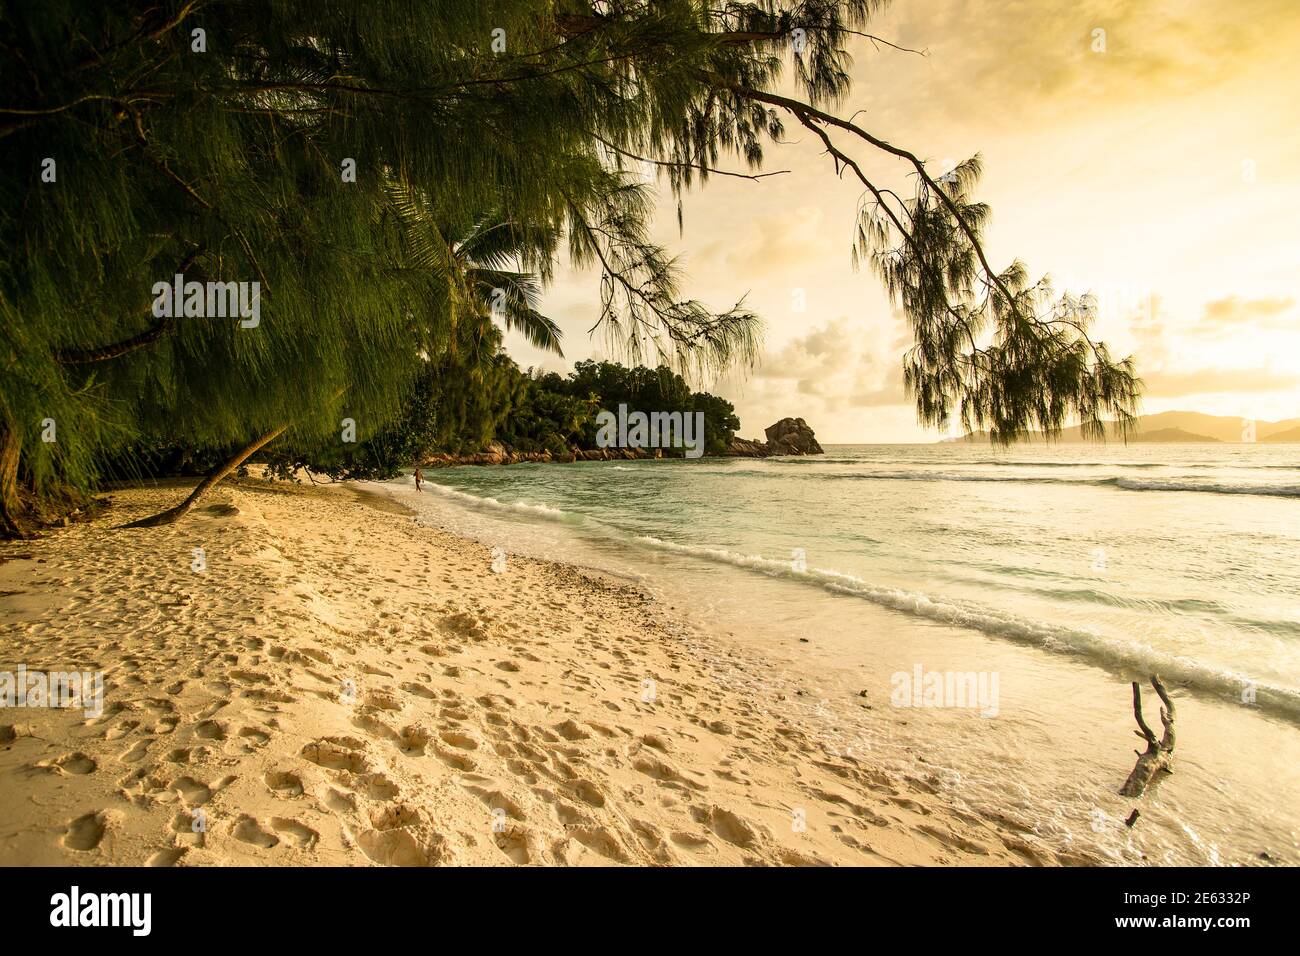 Beach with filao (Casuarina equisetifolia) and coconut palms in Seychelles at dusk with sunset. Stock Photo